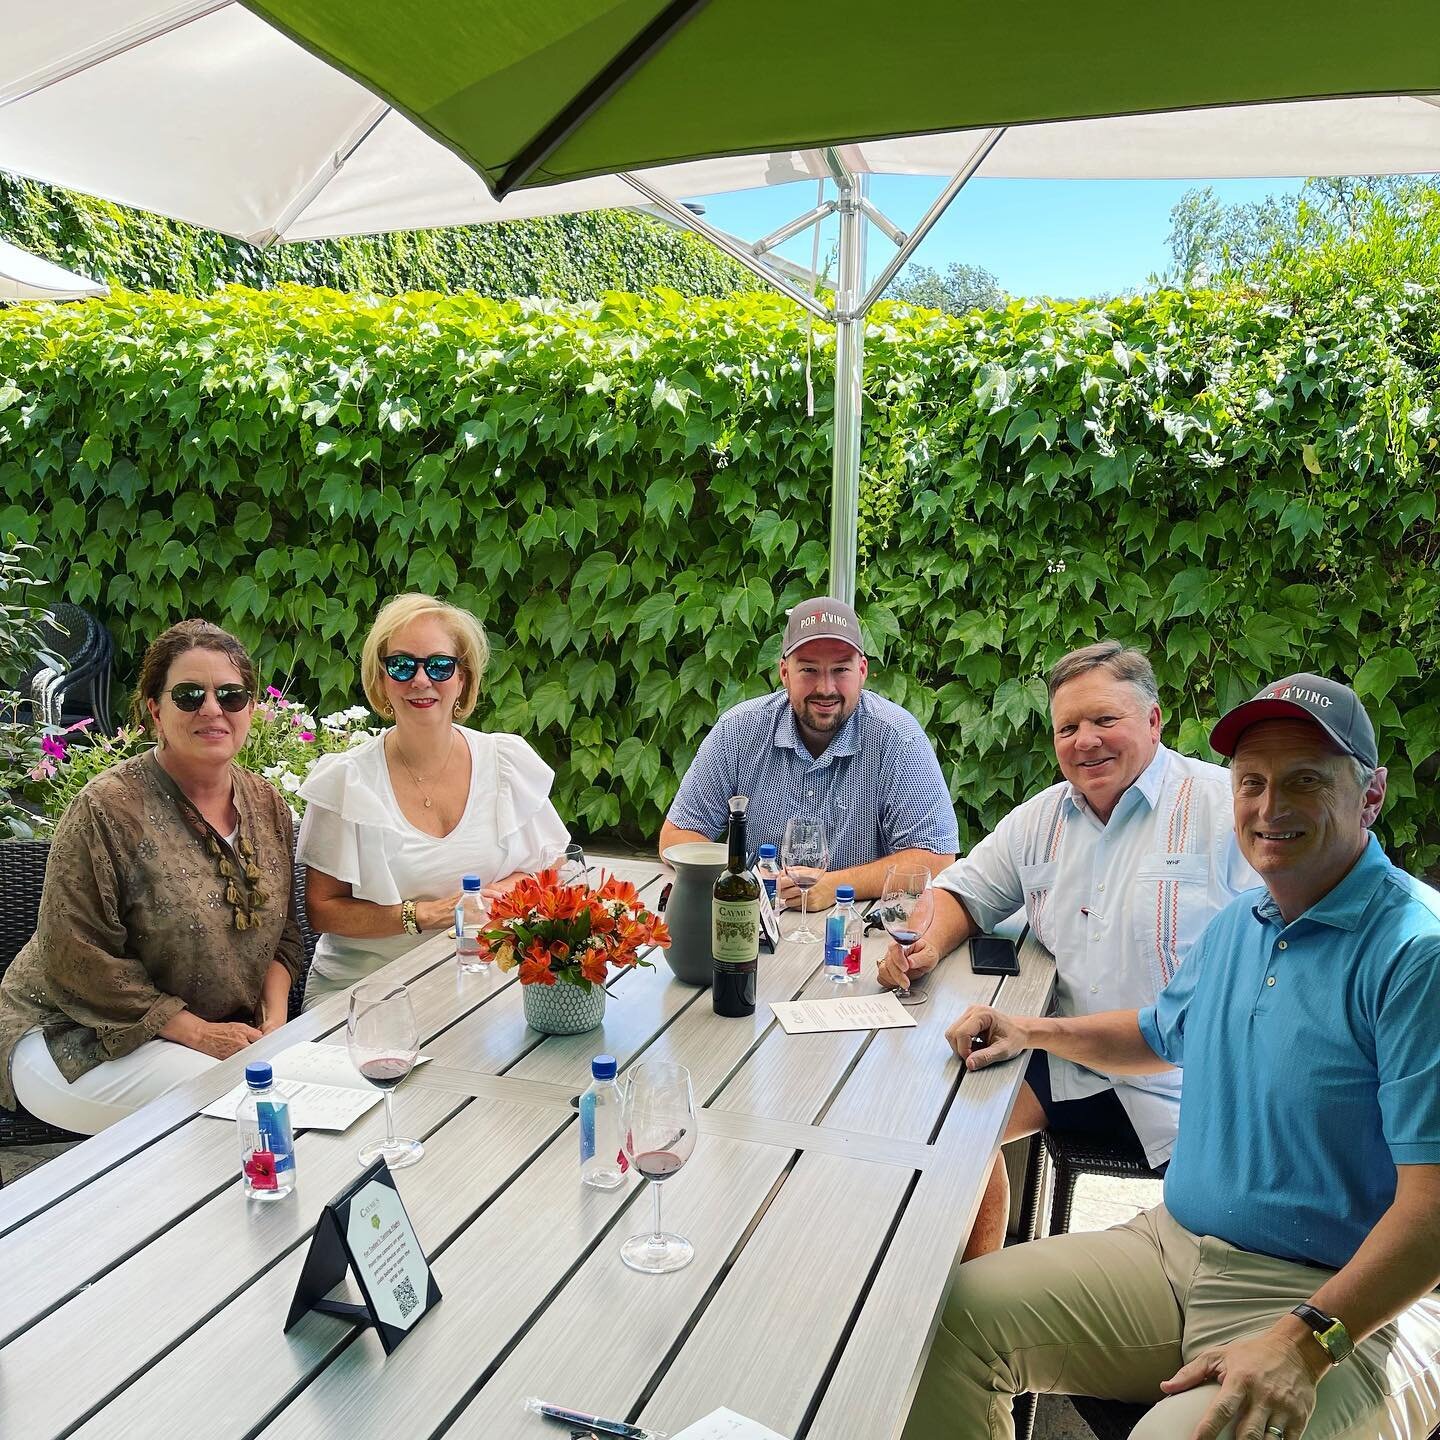 While the Floyds &amp; Brennemans were in Napa, they spent a morning at Caymus Vineyards and had a wonderful time!

Porta&rsquo;Vino sells Liters of Caymus Cabernet Sauvignon! As always, you can purchase bottles to go.

Call today to make a reservati